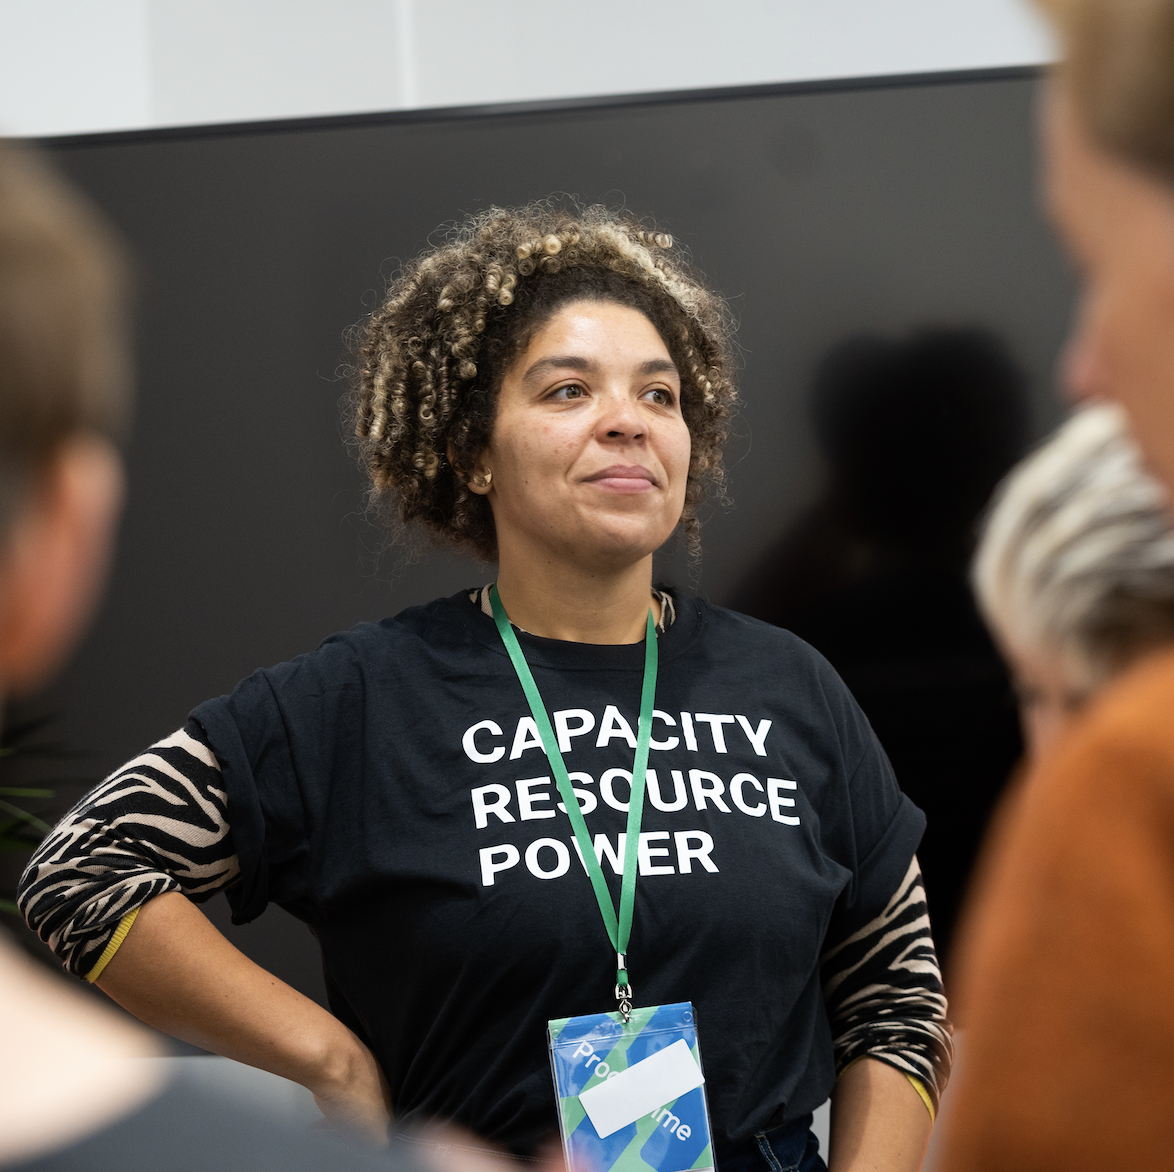 The image is of a brown-skinned women with black and blonde curly hair wearing a black t-shirt with the phrase 'Capacity, Resource, Power' on it.